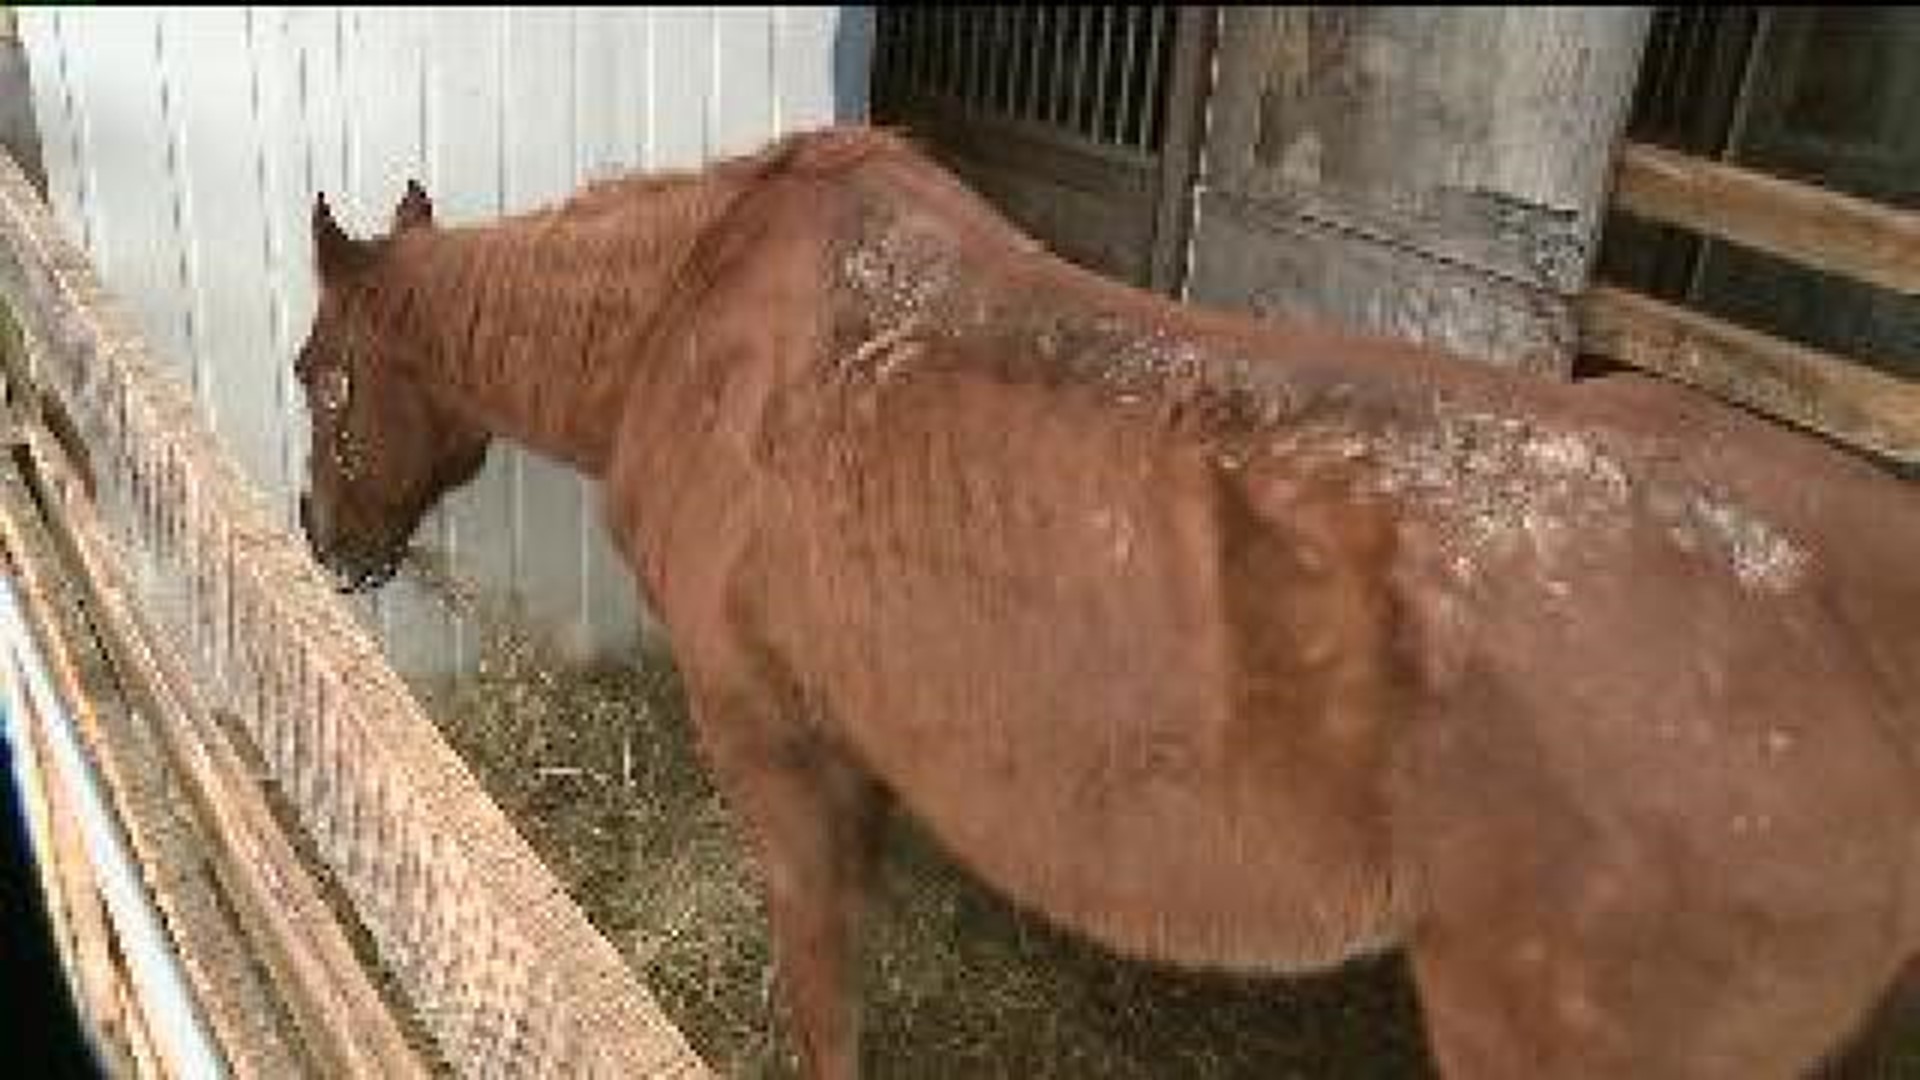 Four Face Animal Neglect Charges